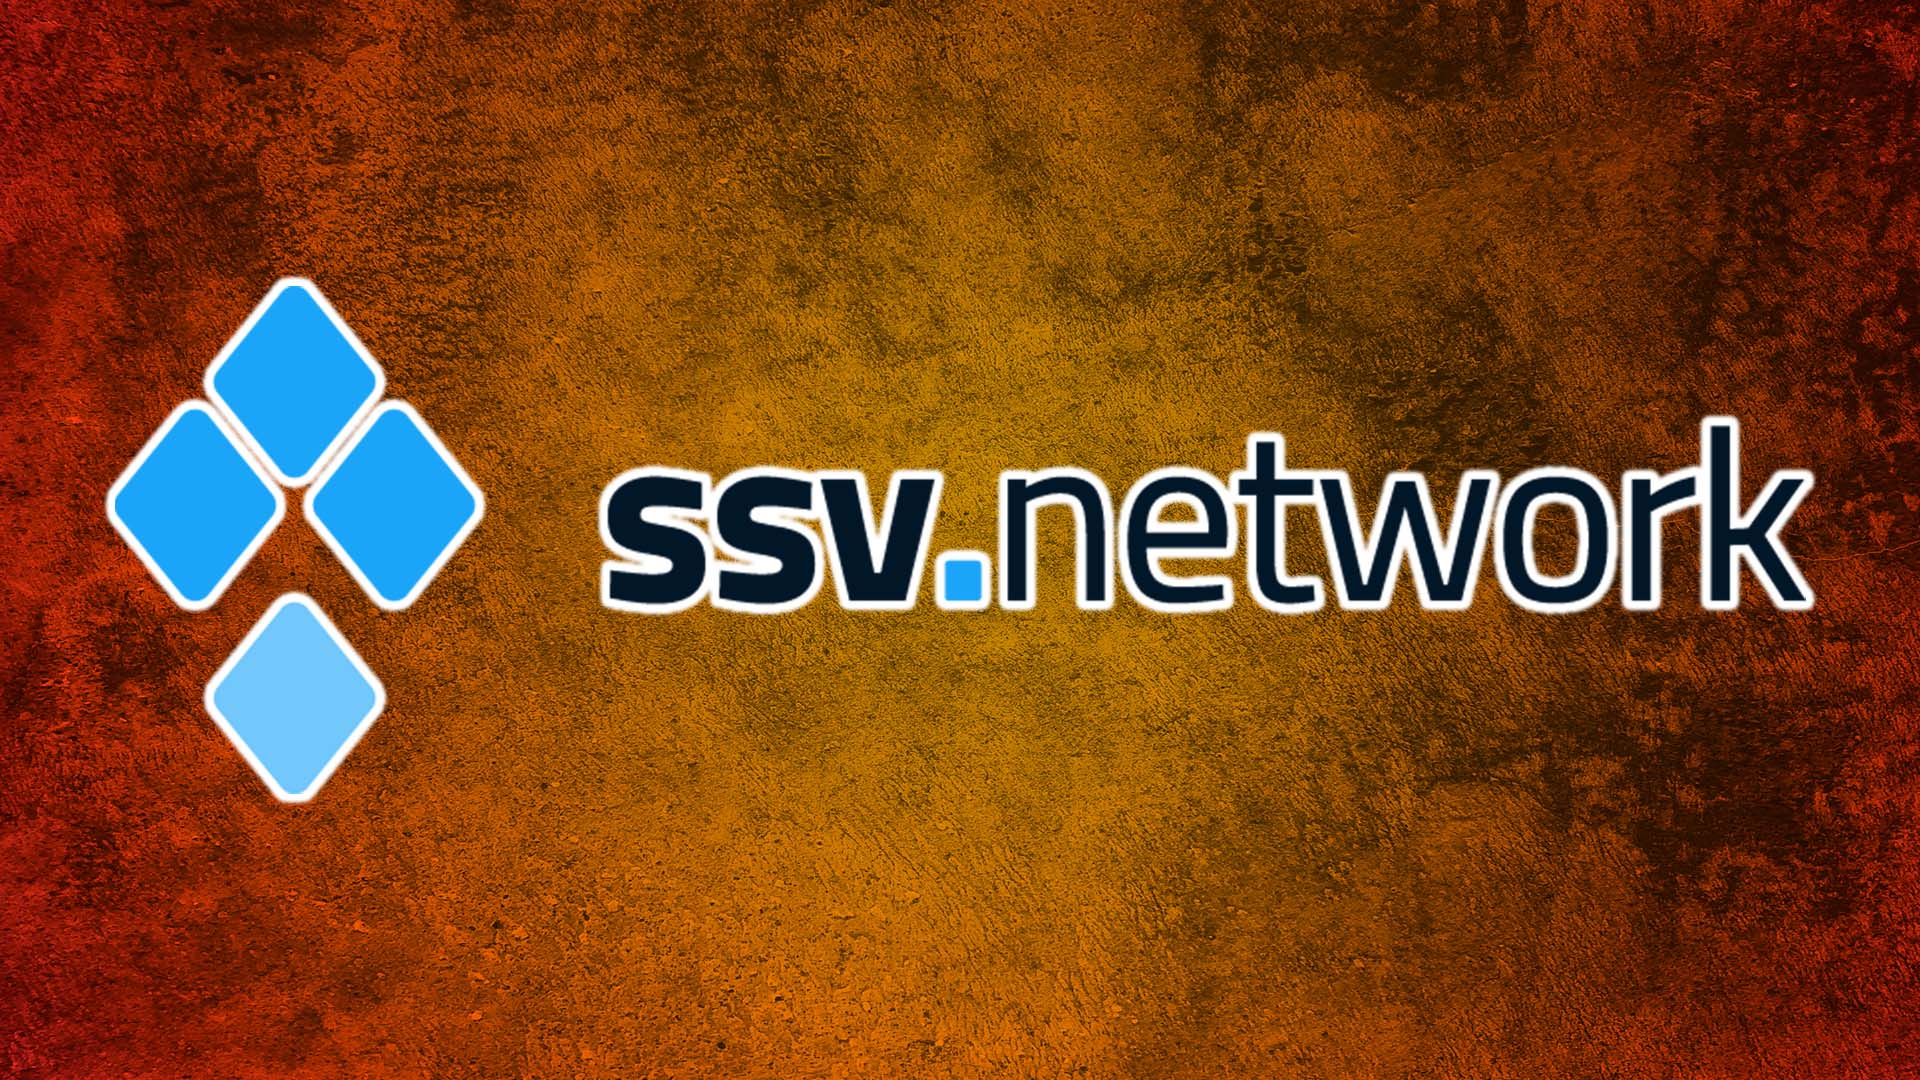 SSV Network Price up by 27%, ETHDenver Hackathon boost confidence - The  Coin Republic